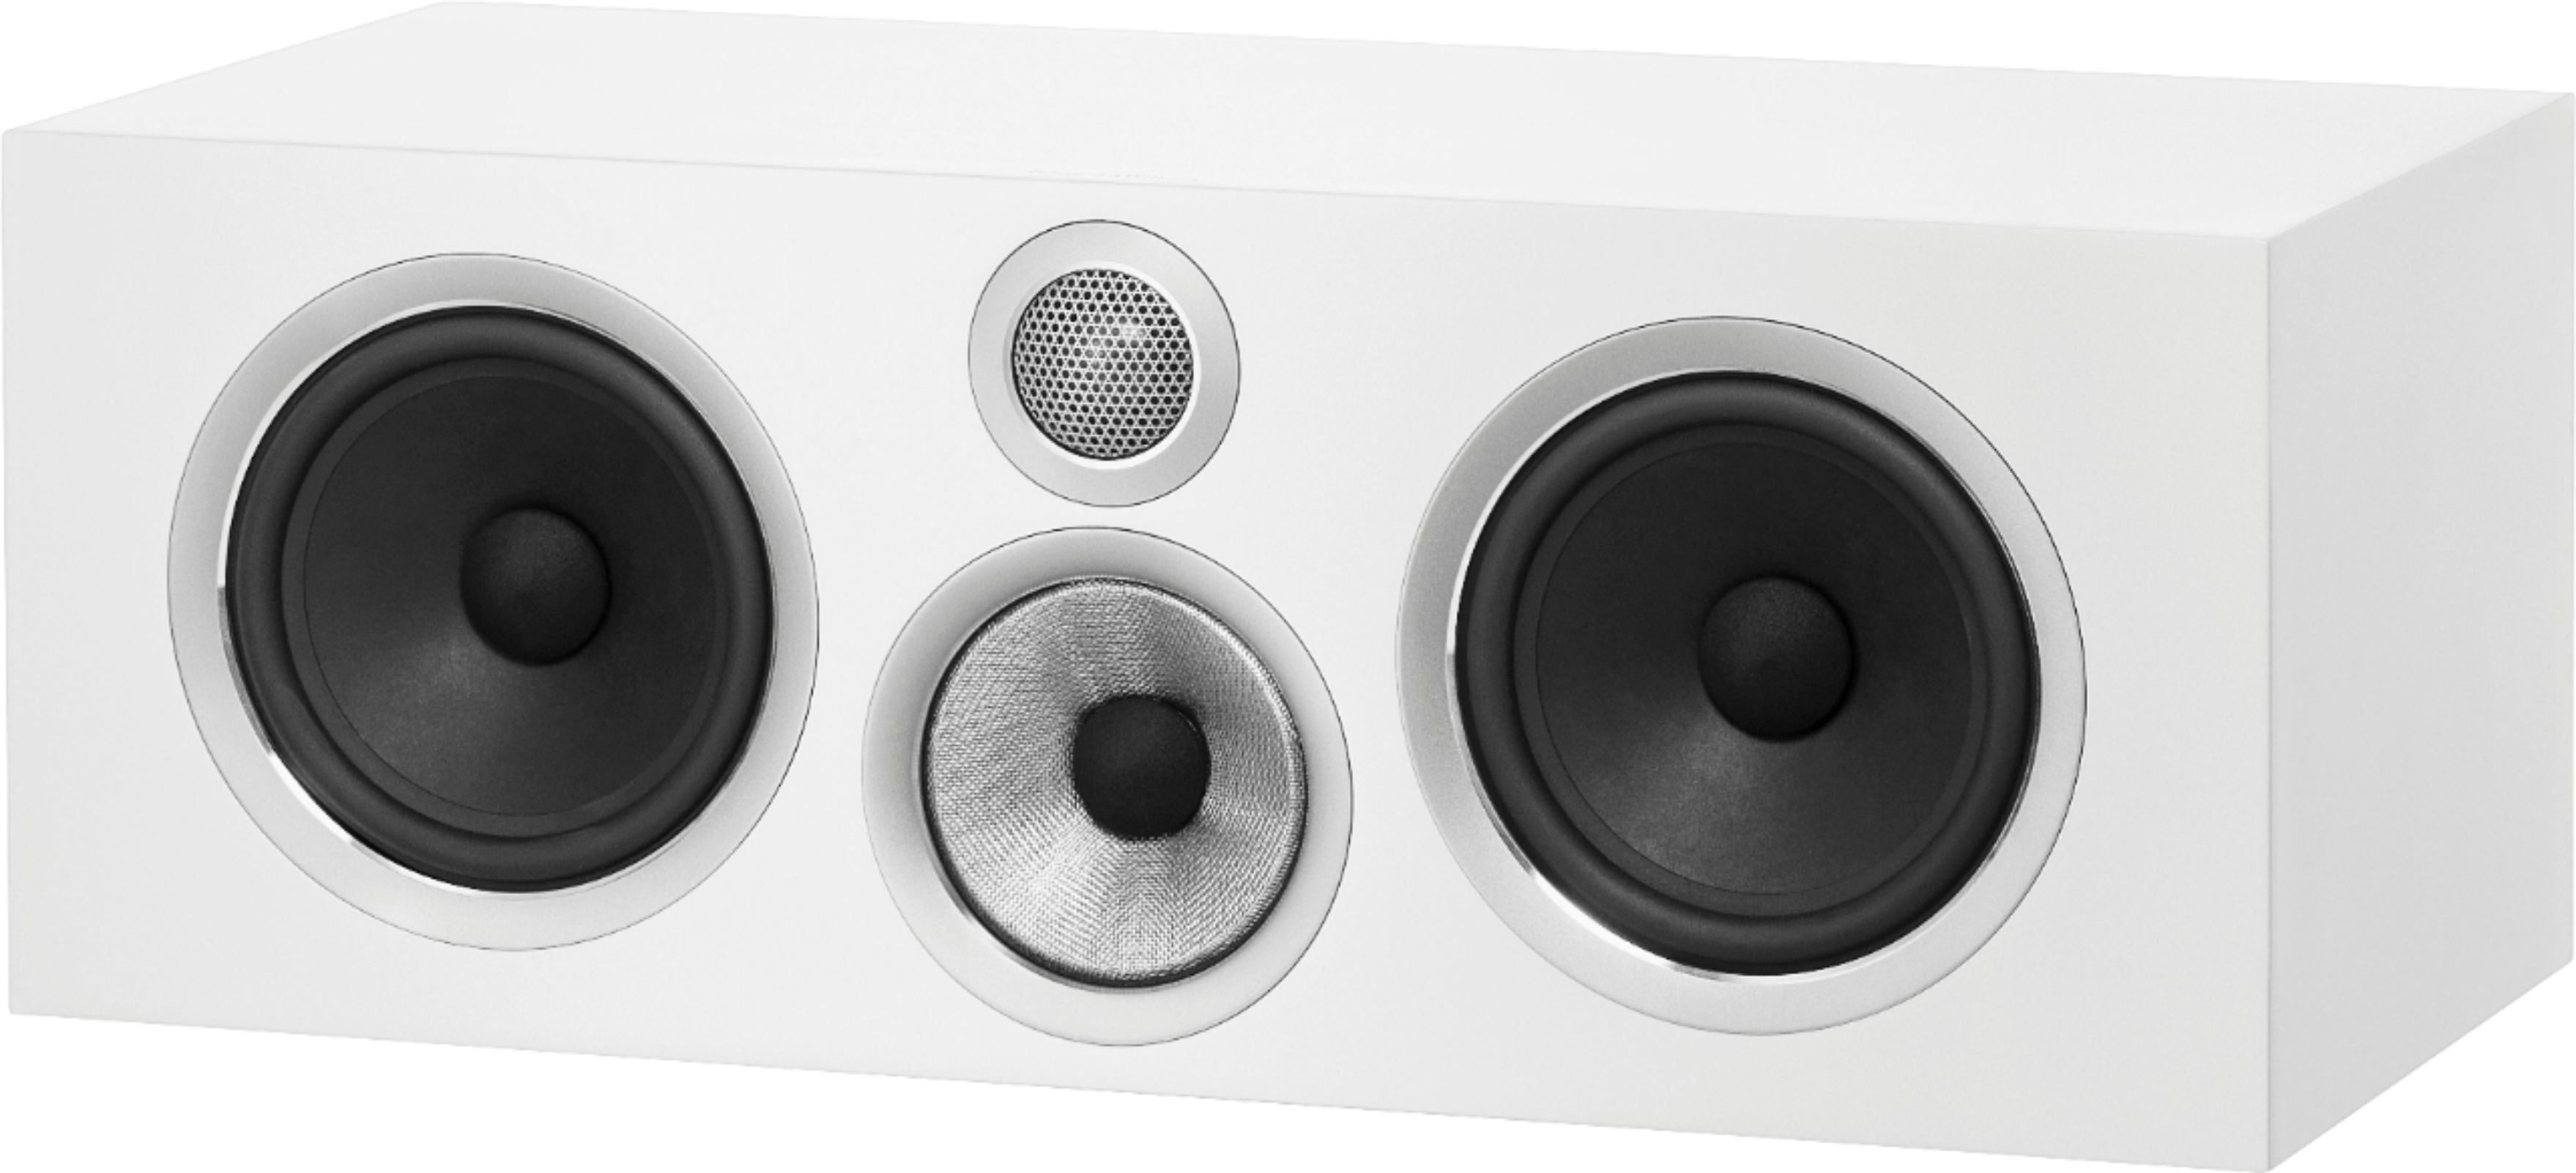 Angle View: KEF - Q series 5-1/4" Passive 2-Way Center-Channel Speaker - Black